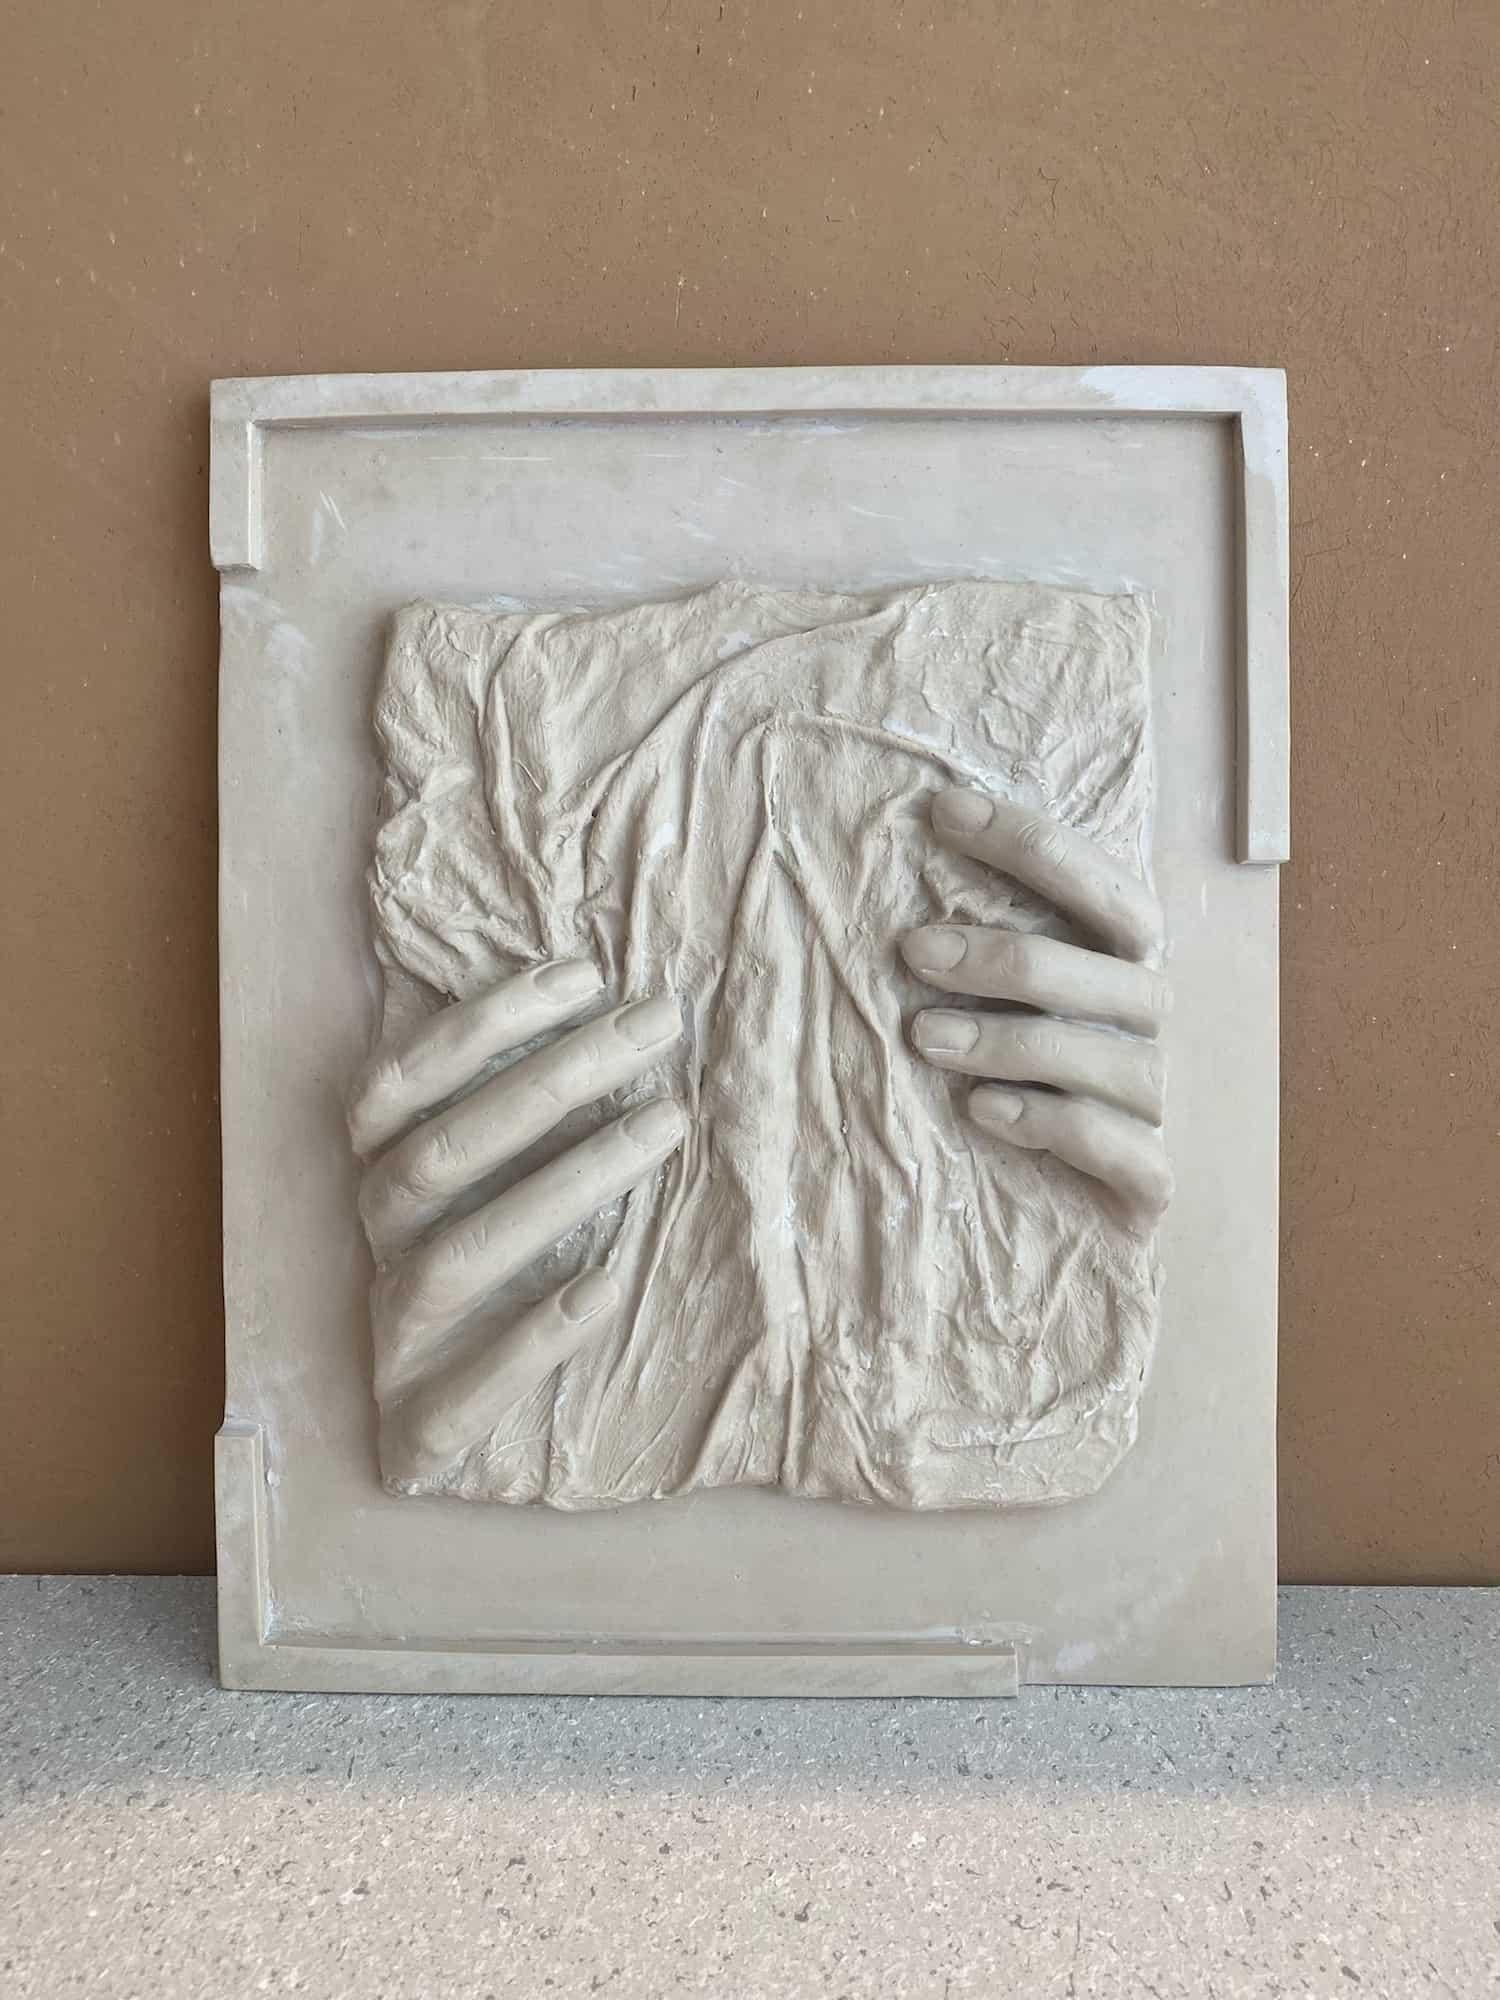 Object No.22 wall piece by Marcela Cure
Dimensions: W 40 x D 7 x H 49 cm
Materials: Resin and Stone Composite

This collection is inspired by the delicate curves of the female body, displaying soothing pieces that evoke effortless sophistication